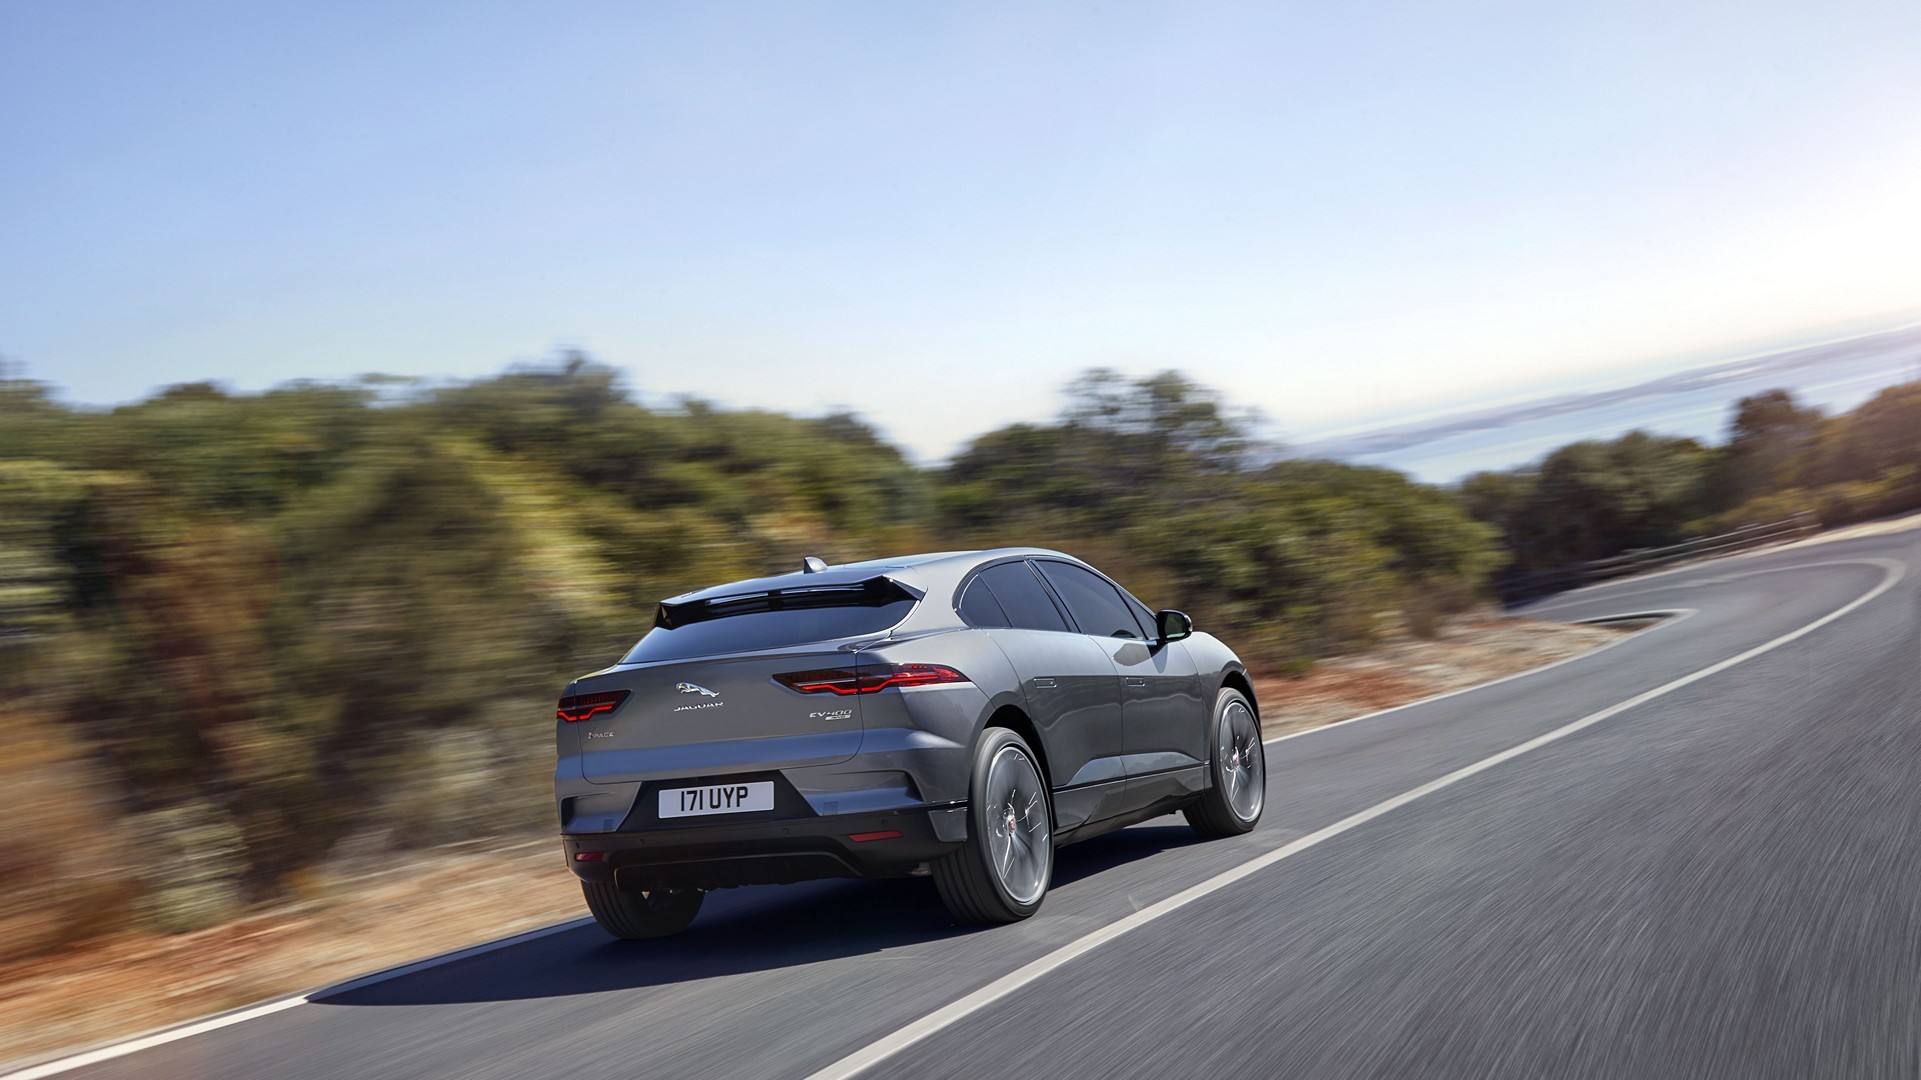 https://s1.cdn.autoevolution.com/images/news/gallery/2020-jaguar-i-pace-update-offers-234-miles-of-range-thanks-to-etrophy-know-how_61.jpg